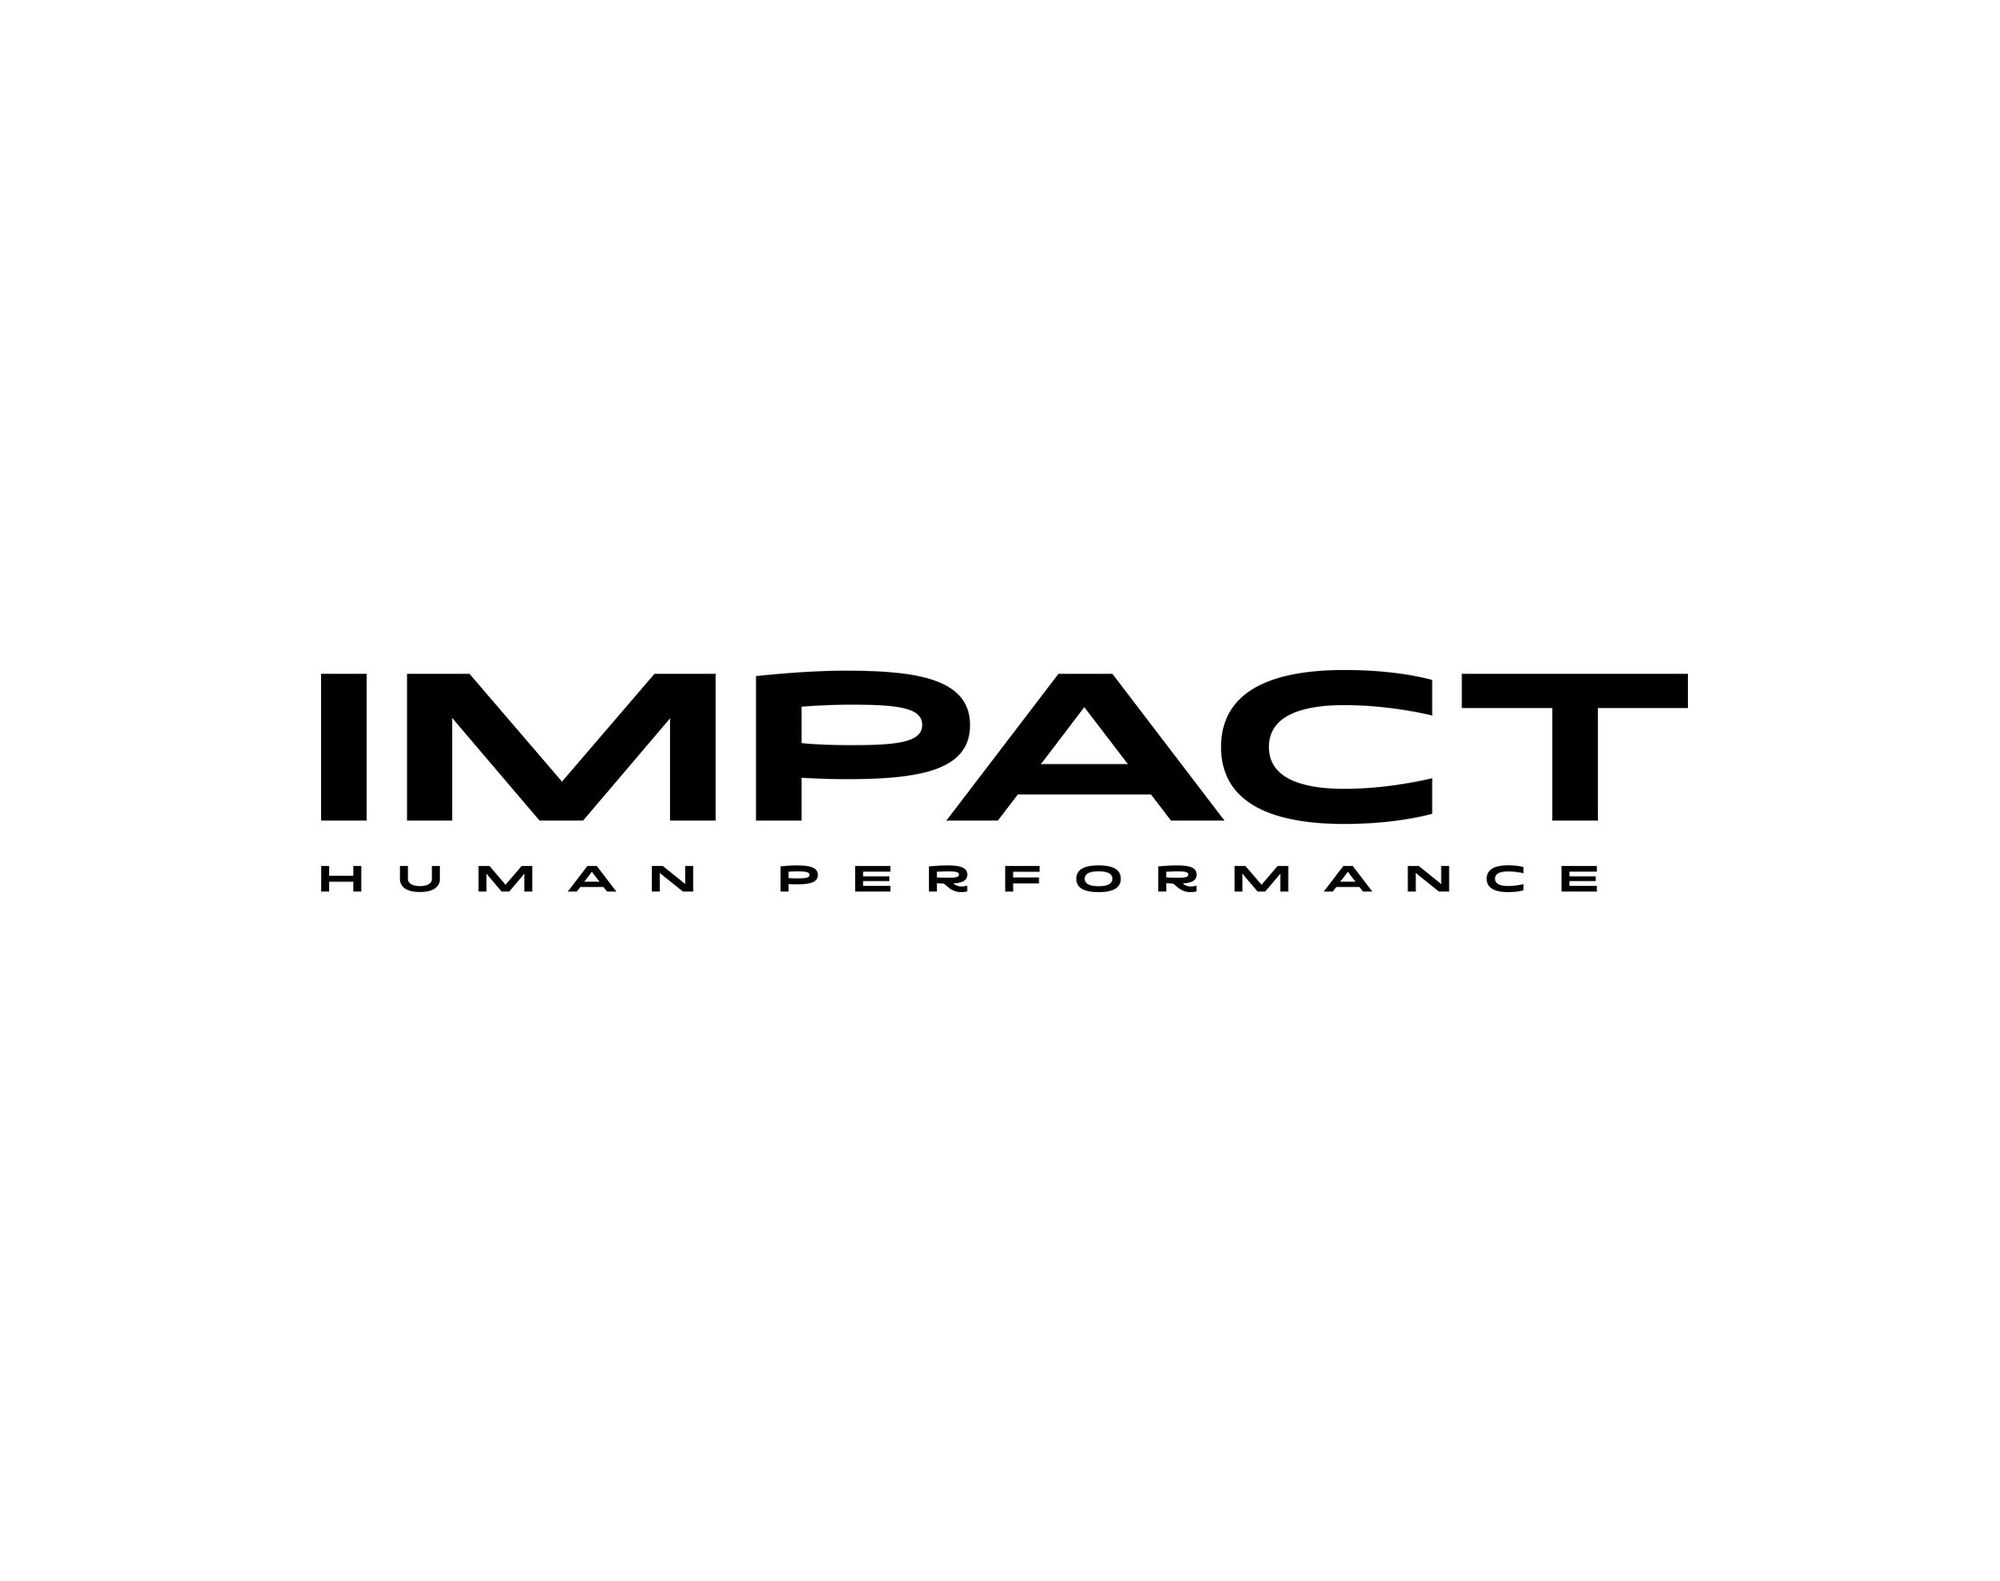 Help People Perform at Their Best - Impact Human Performance